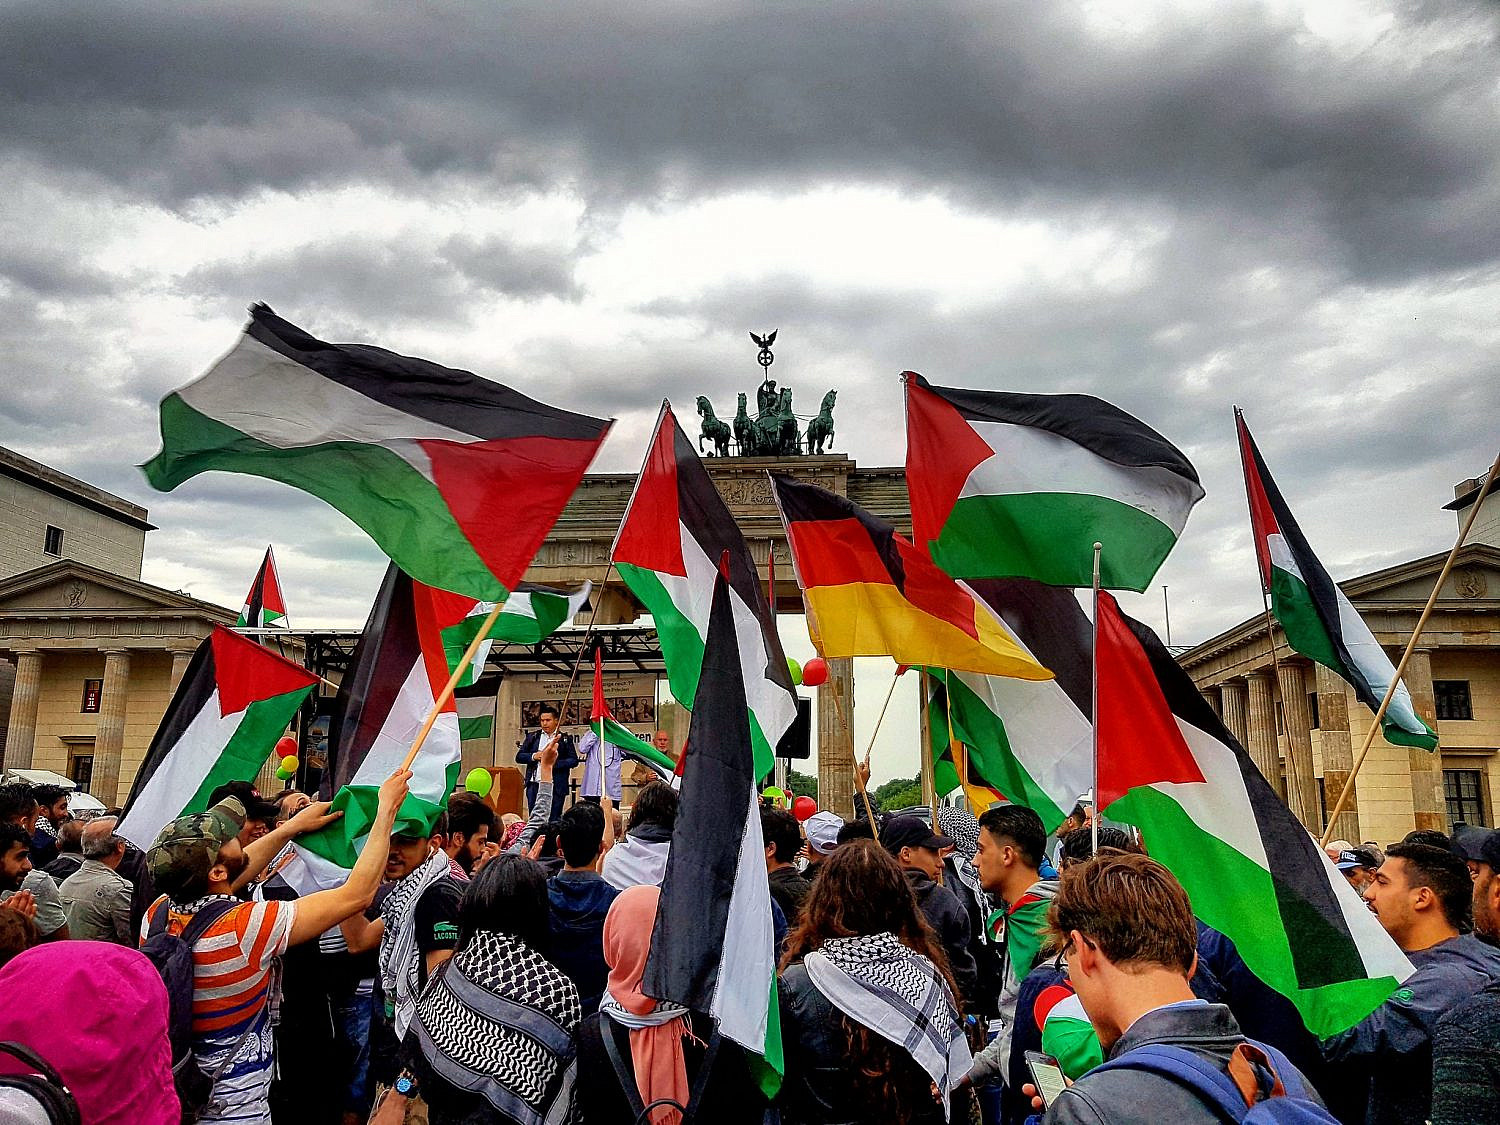 Palestine solidarity protest in Berlin, Germany, May 15, 2018. Photo: Hossam el-Hamalawy/Flickr/CC BY 2.0.